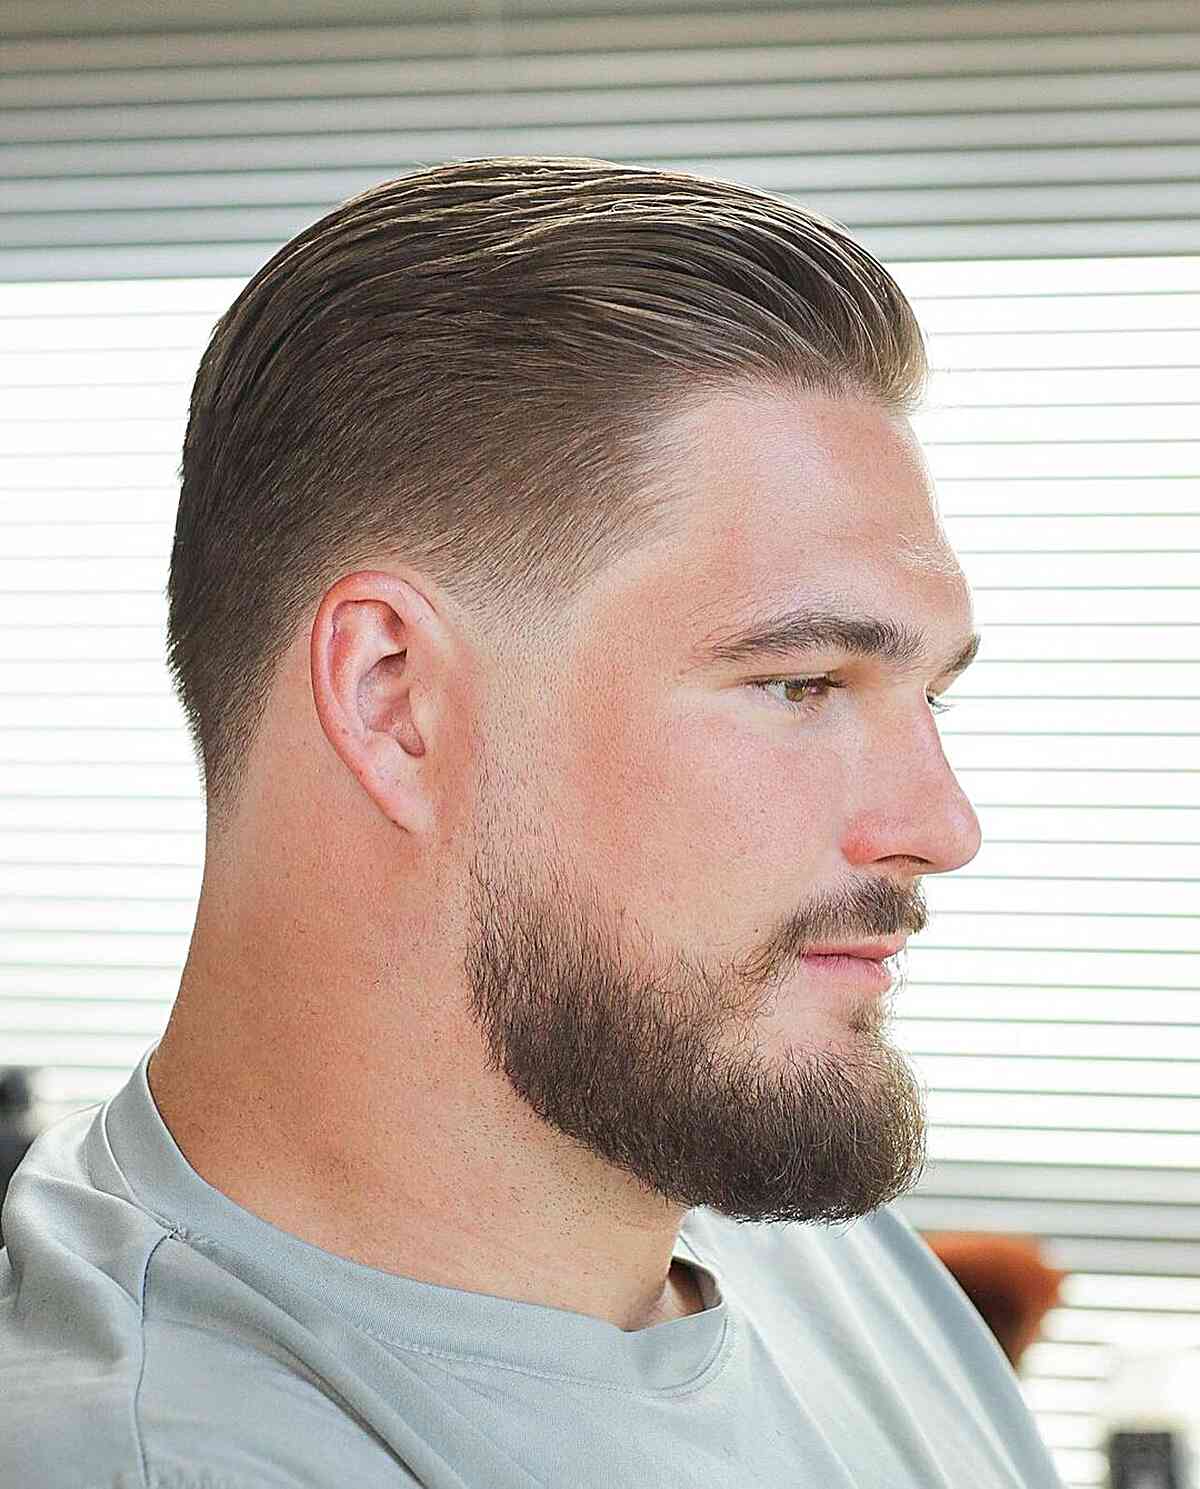 40+ Best Slicked Back Hairstyle Ideas for Men to Show Your Barber ASAP |  Professional hairstyles for men, Mens hairstyles, Slicked back hair